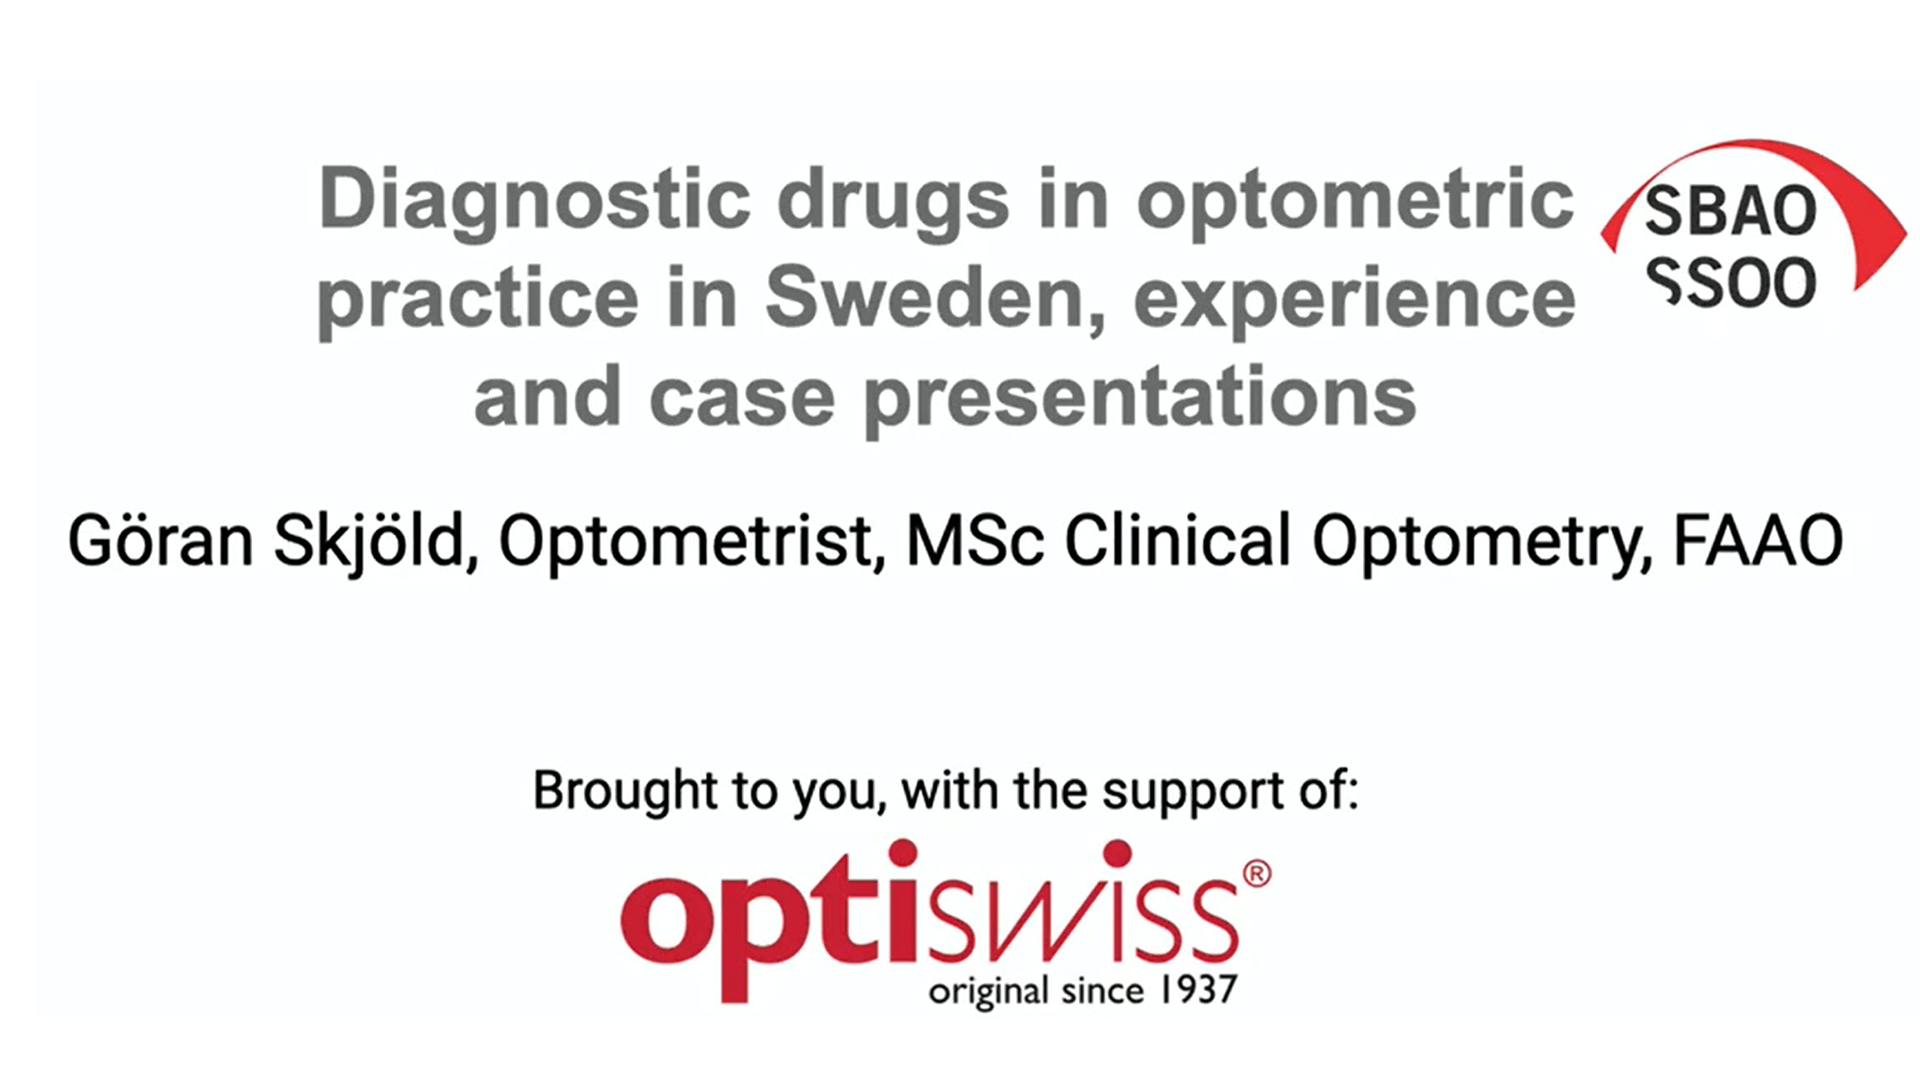 SBAO Webinar Diagnostic drugs in optometric practice in Sweden, experience and case presentations